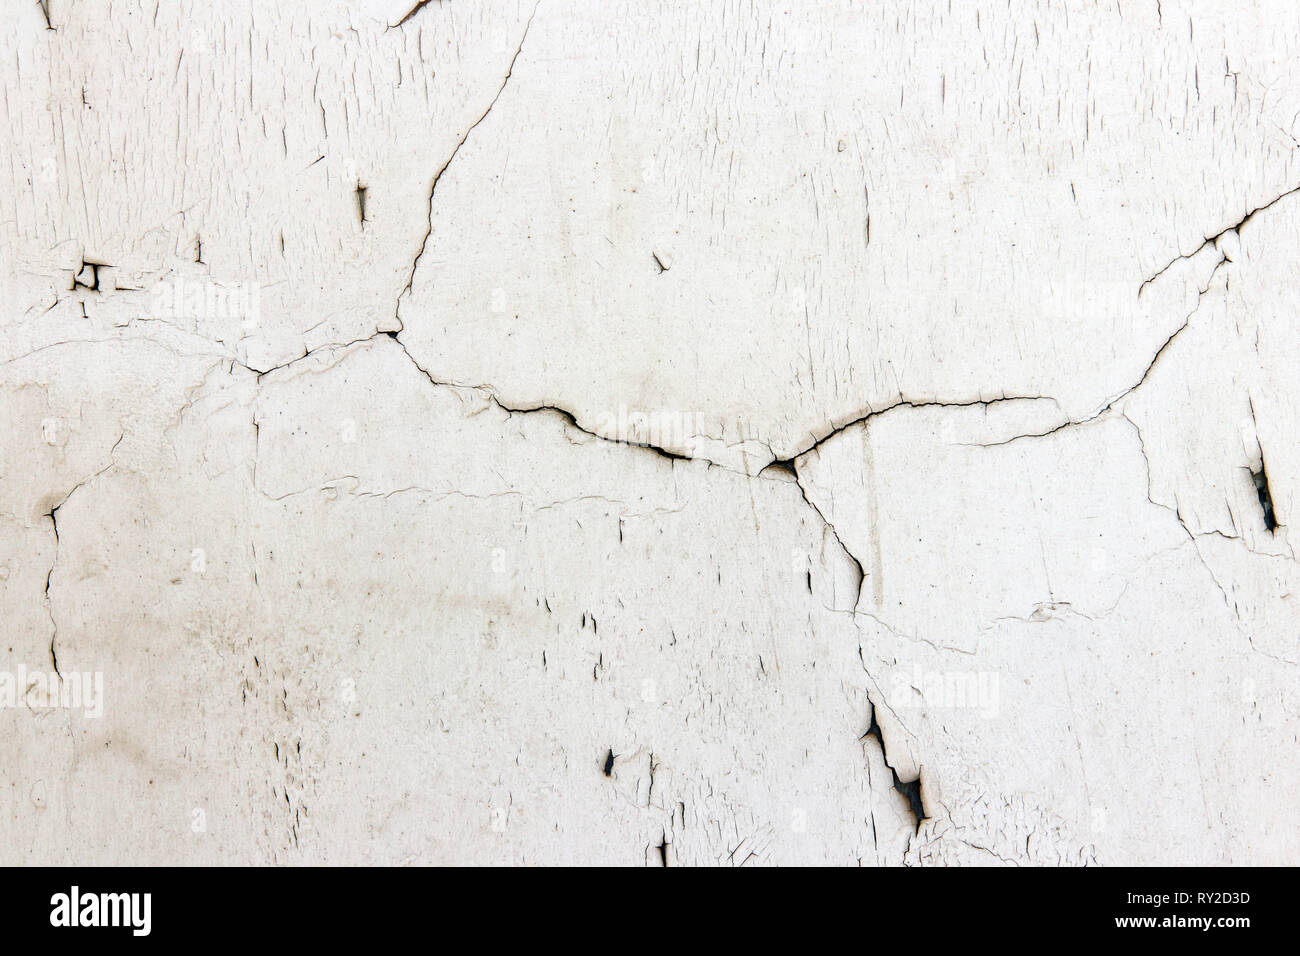 Detail of the fine cracks on the surface - grunge texture Stock Photo